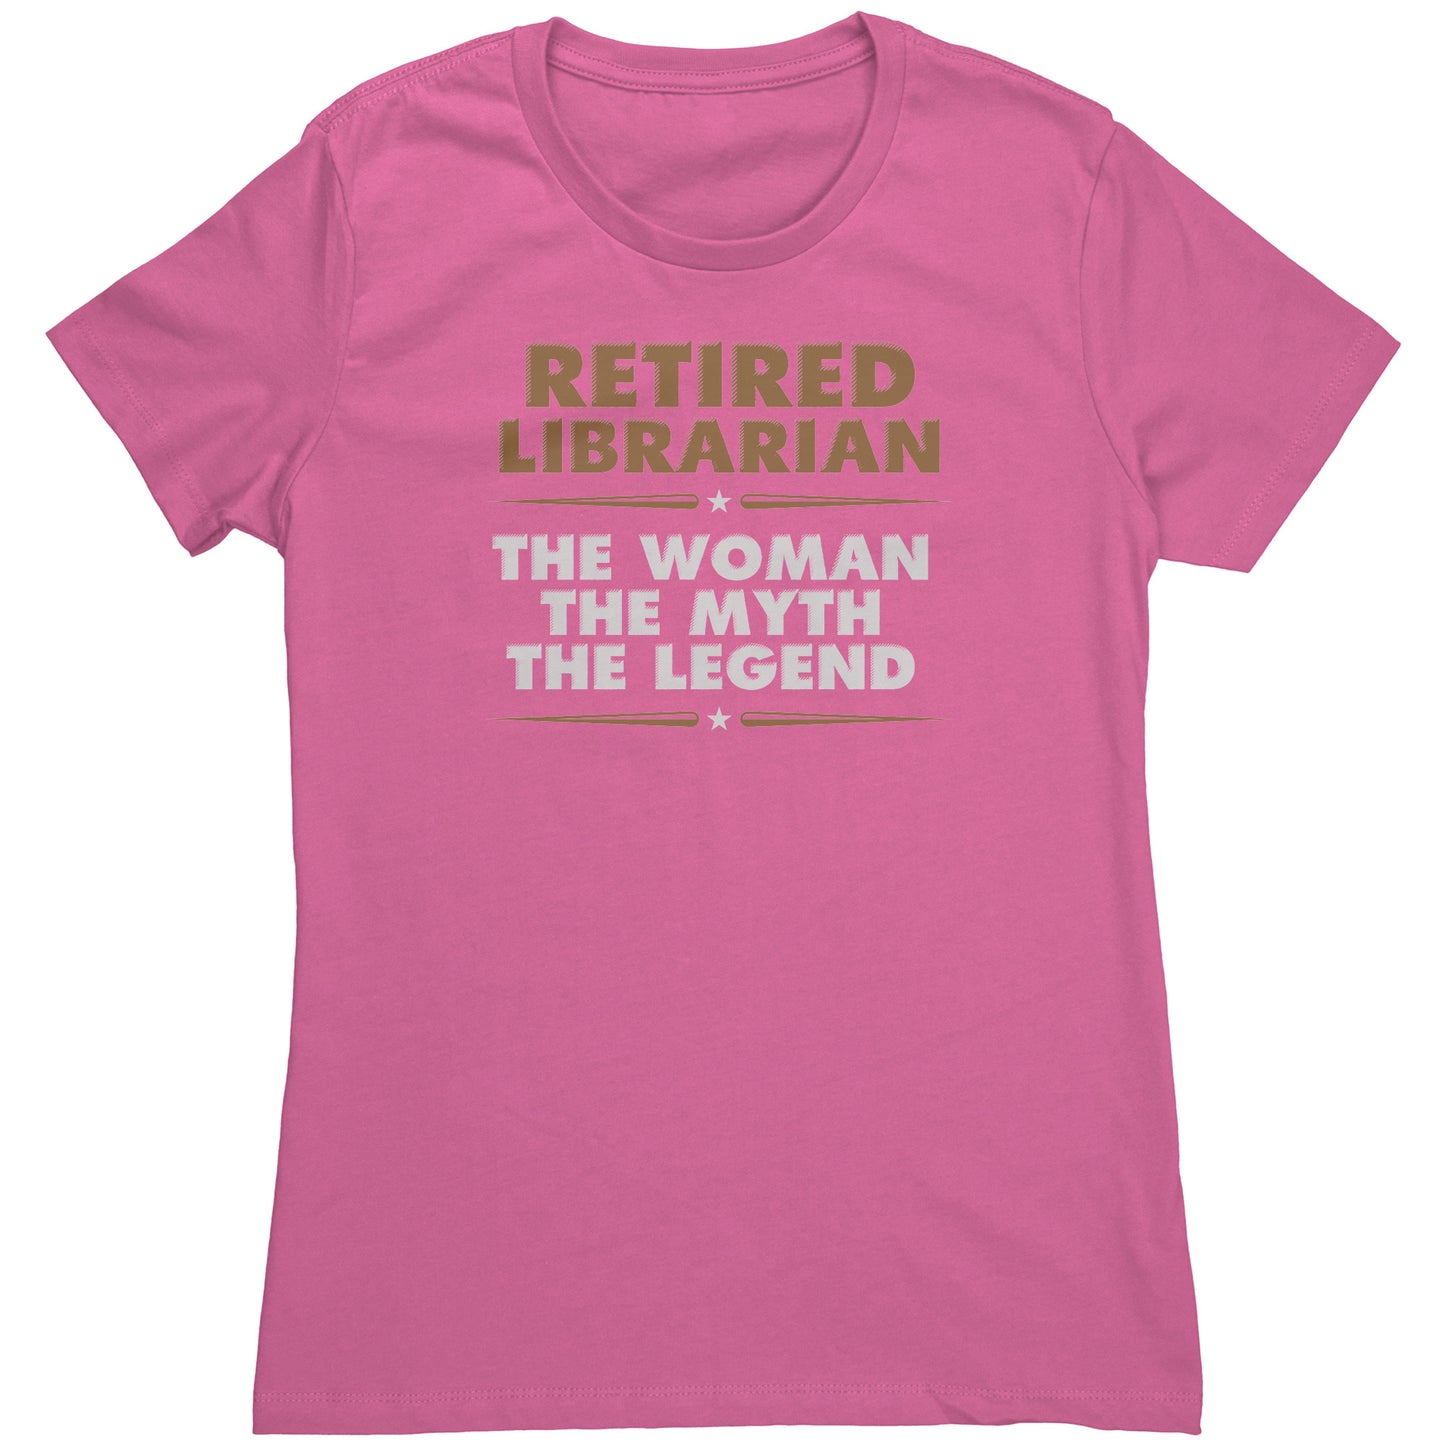 Retired Librarian. The Woman The Myth The Legend | Women's T-Shirt